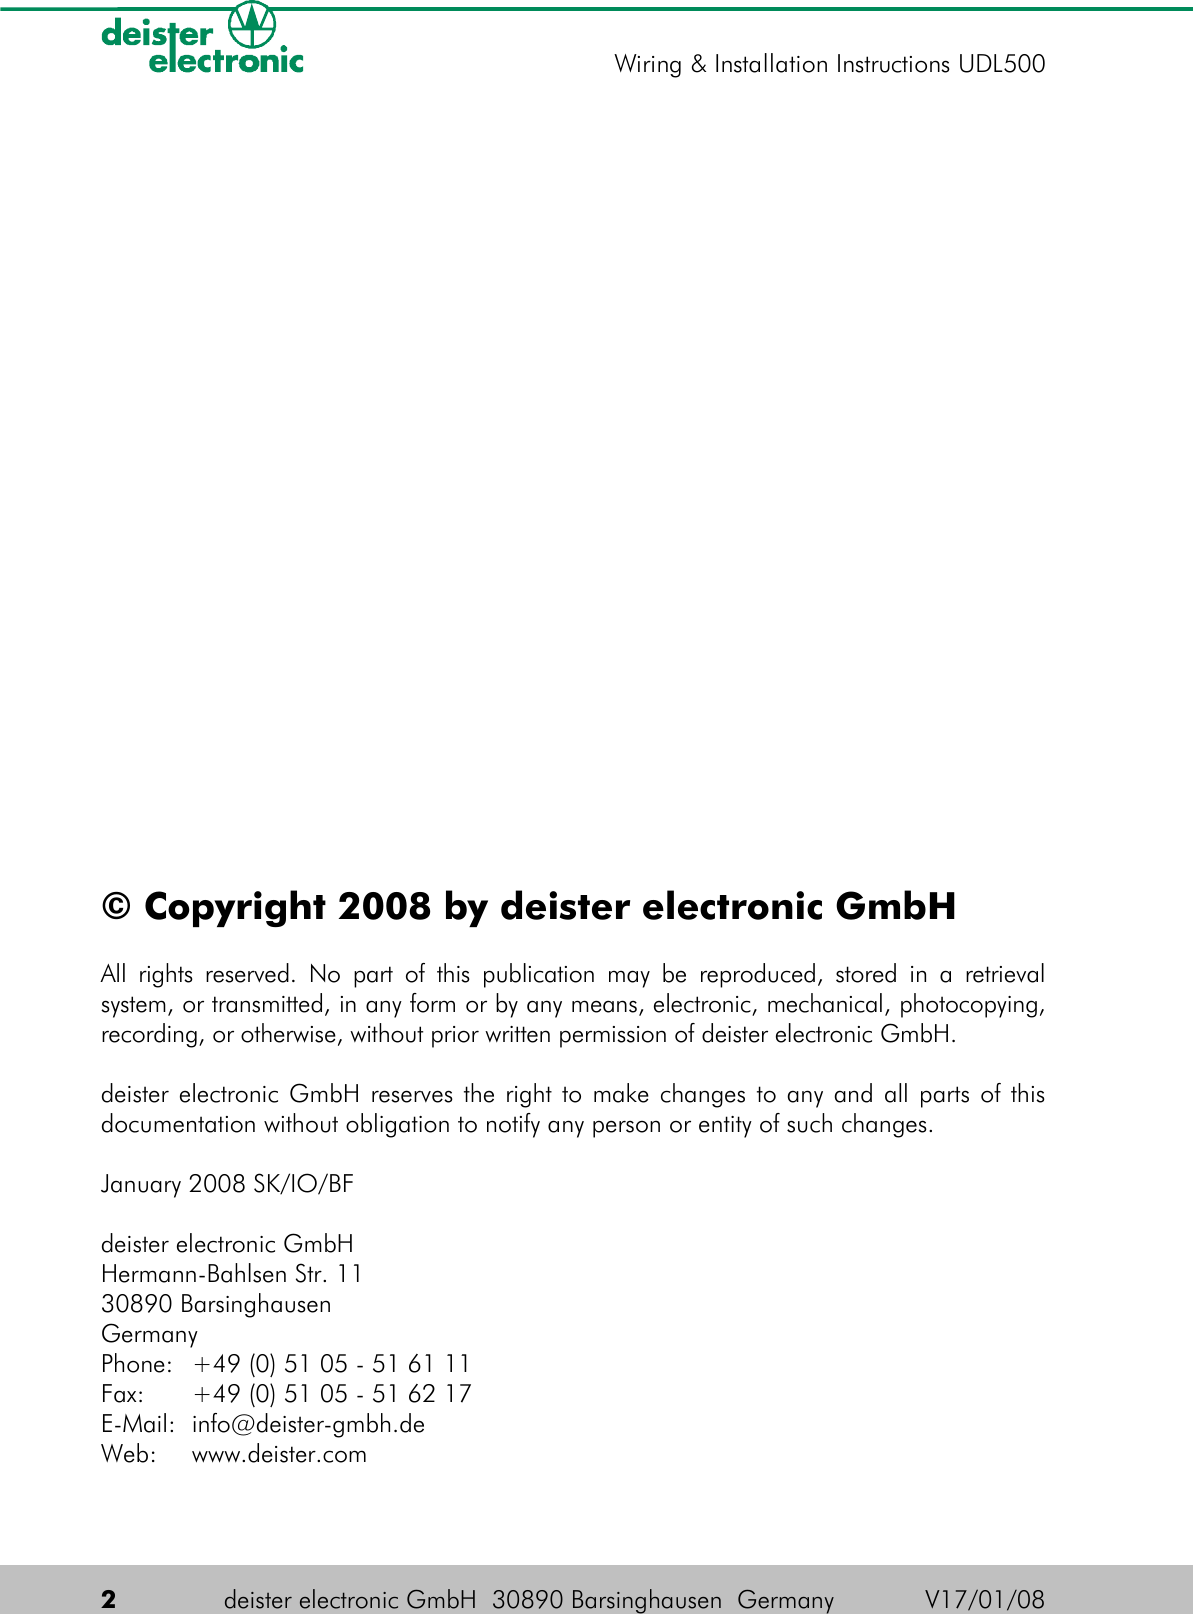 © Copyright 2008 by deister electronic GmbHAll rights reserved. No part of this publication may be reproduced, stored in a retrieval system, or transmitted, in any form or by any means, electronic, mechanical, photocopying, recording, or otherwise, without prior written permission of deister electronic GmbH.deister electronic GmbH reserves the right to make changes to any and all parts of this documentation without obligation to notify any person or entity of such changes.January 2008 SK/IO/BFdeister electronic GmbHHermann-Bahlsen Str. 11 30890 BarsinghausenGermanyPhone: +49 (0) 51 05 - 51 61 11Fax: +49 (0) 51 05 - 51 62 17E-Mail: info@deister-gmbh.deWeb: www.deister.com 2deister electronic GmbH  30890 Barsinghausen  Germany V17/01/08Wiring &amp; Installation Instructions UDL500